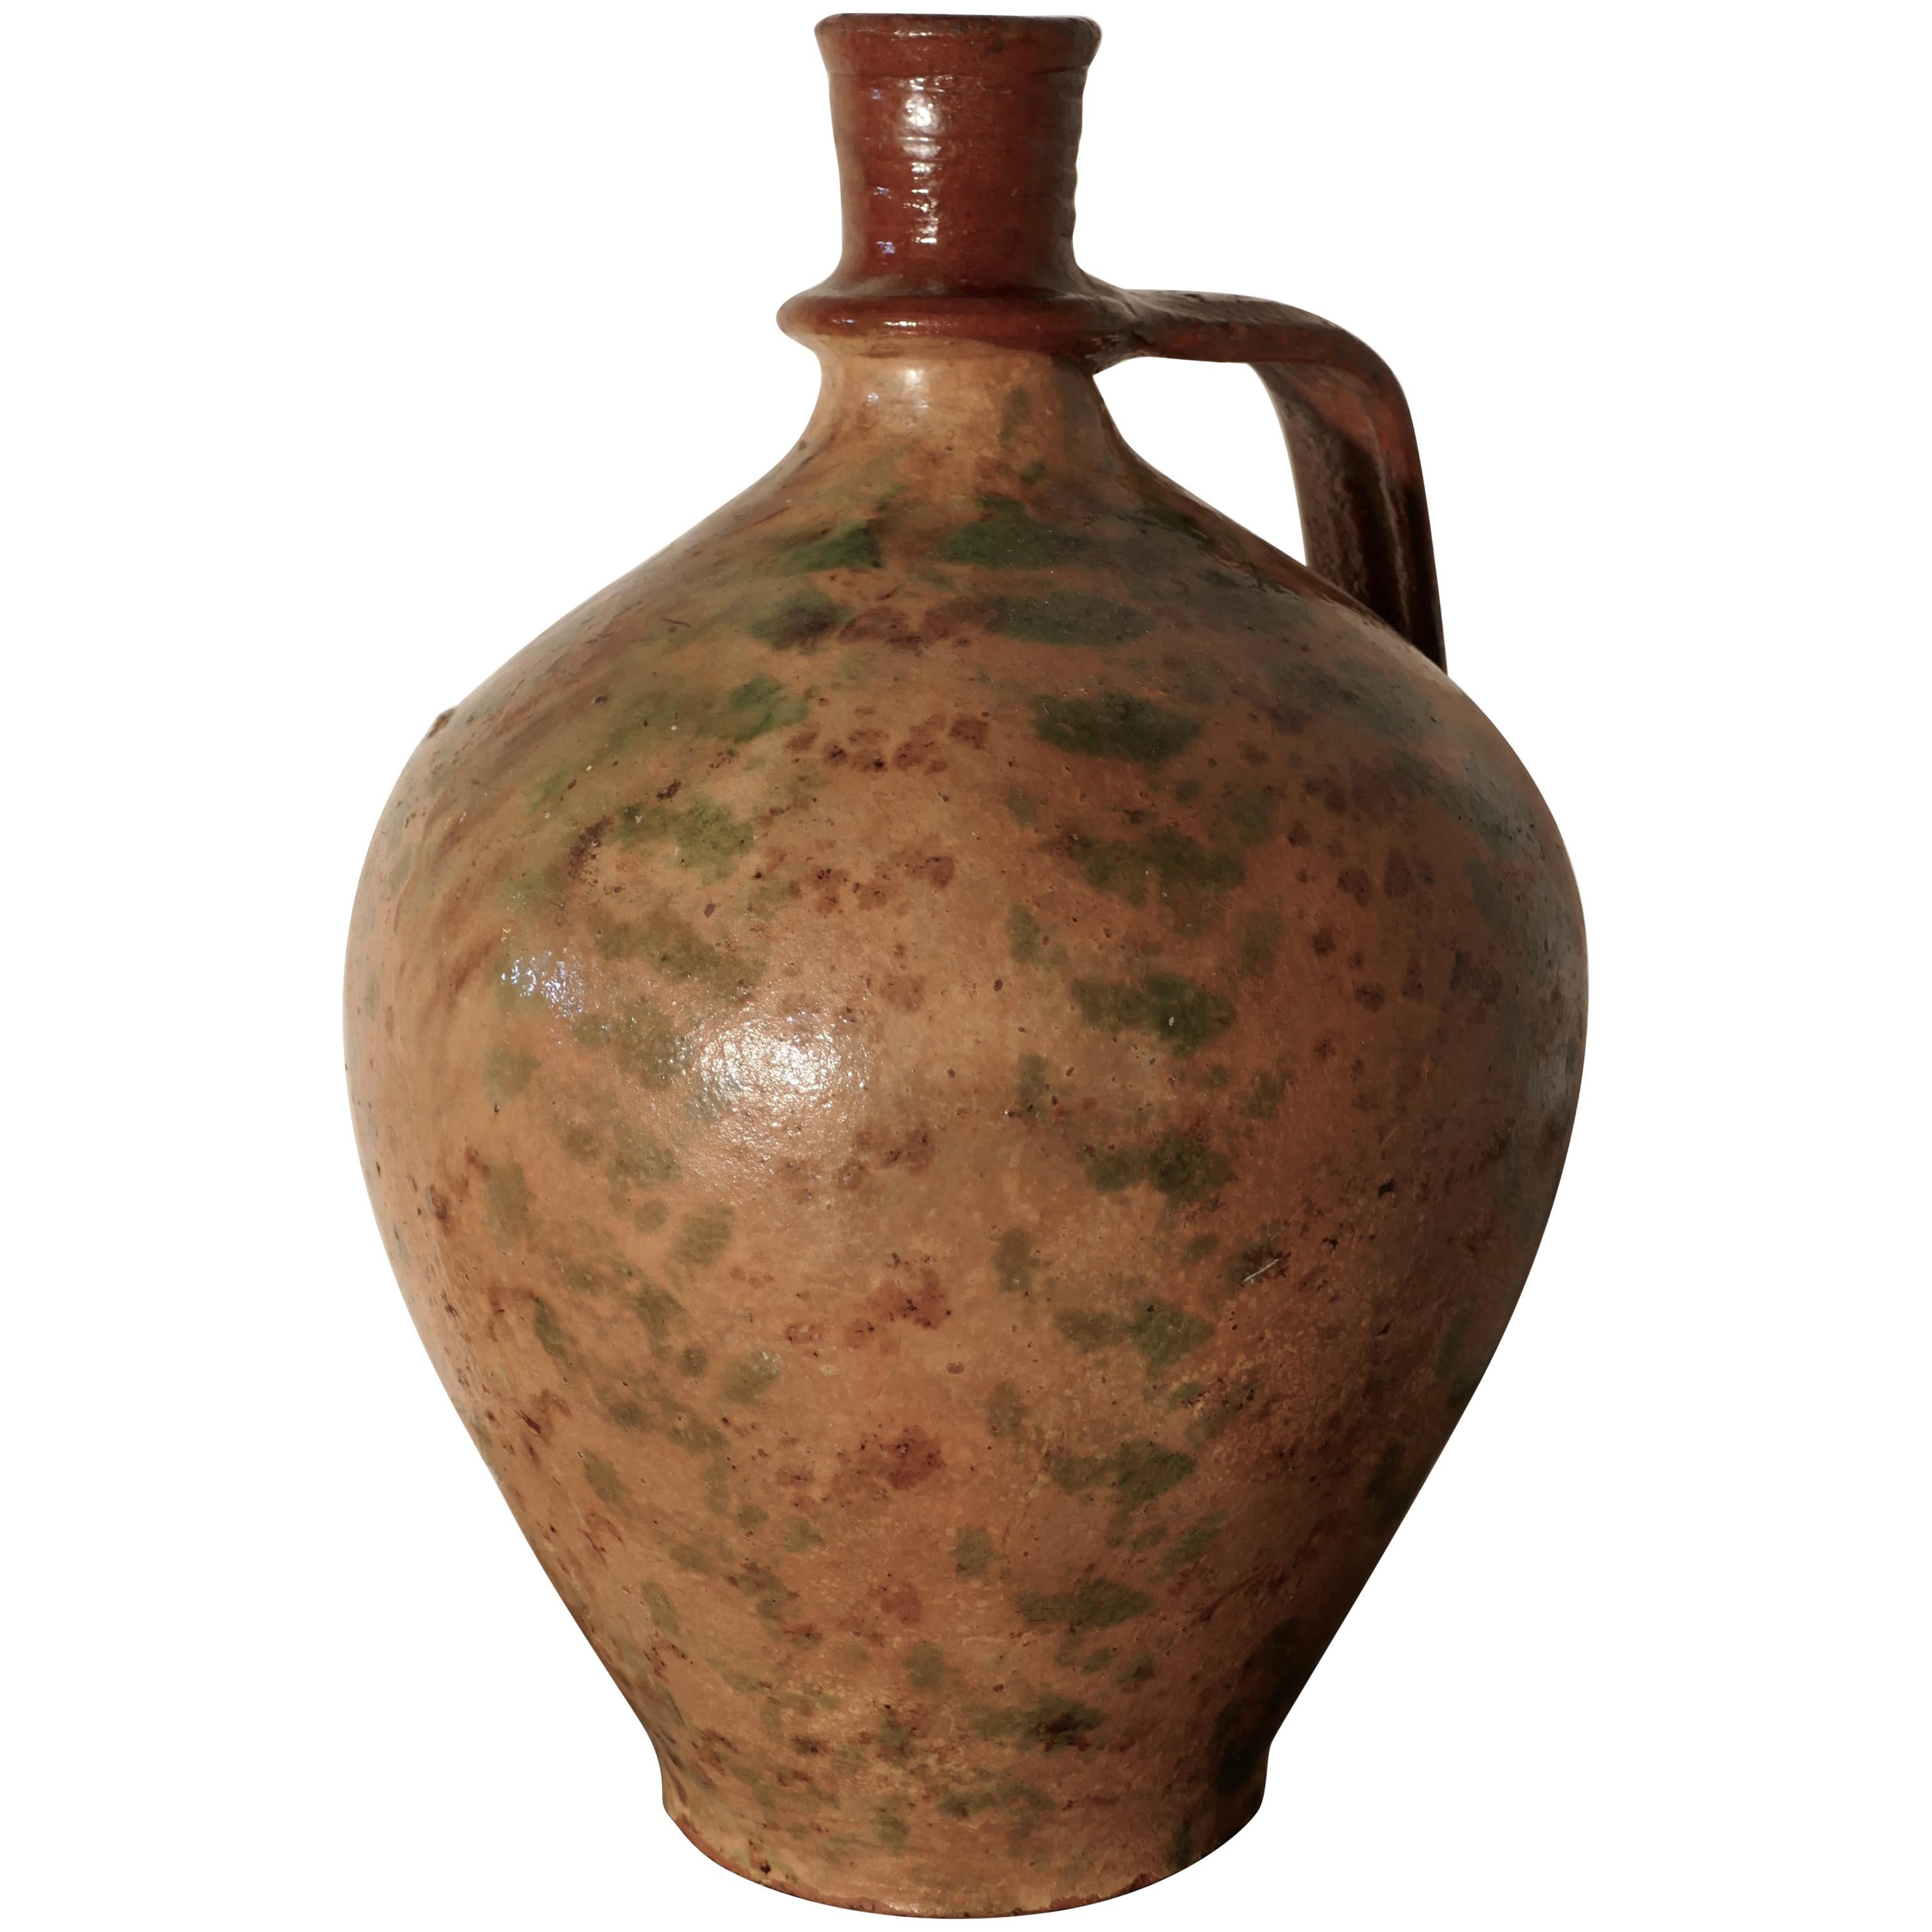 Olive Oil Jug from Portugal made in Painted Terracotta 